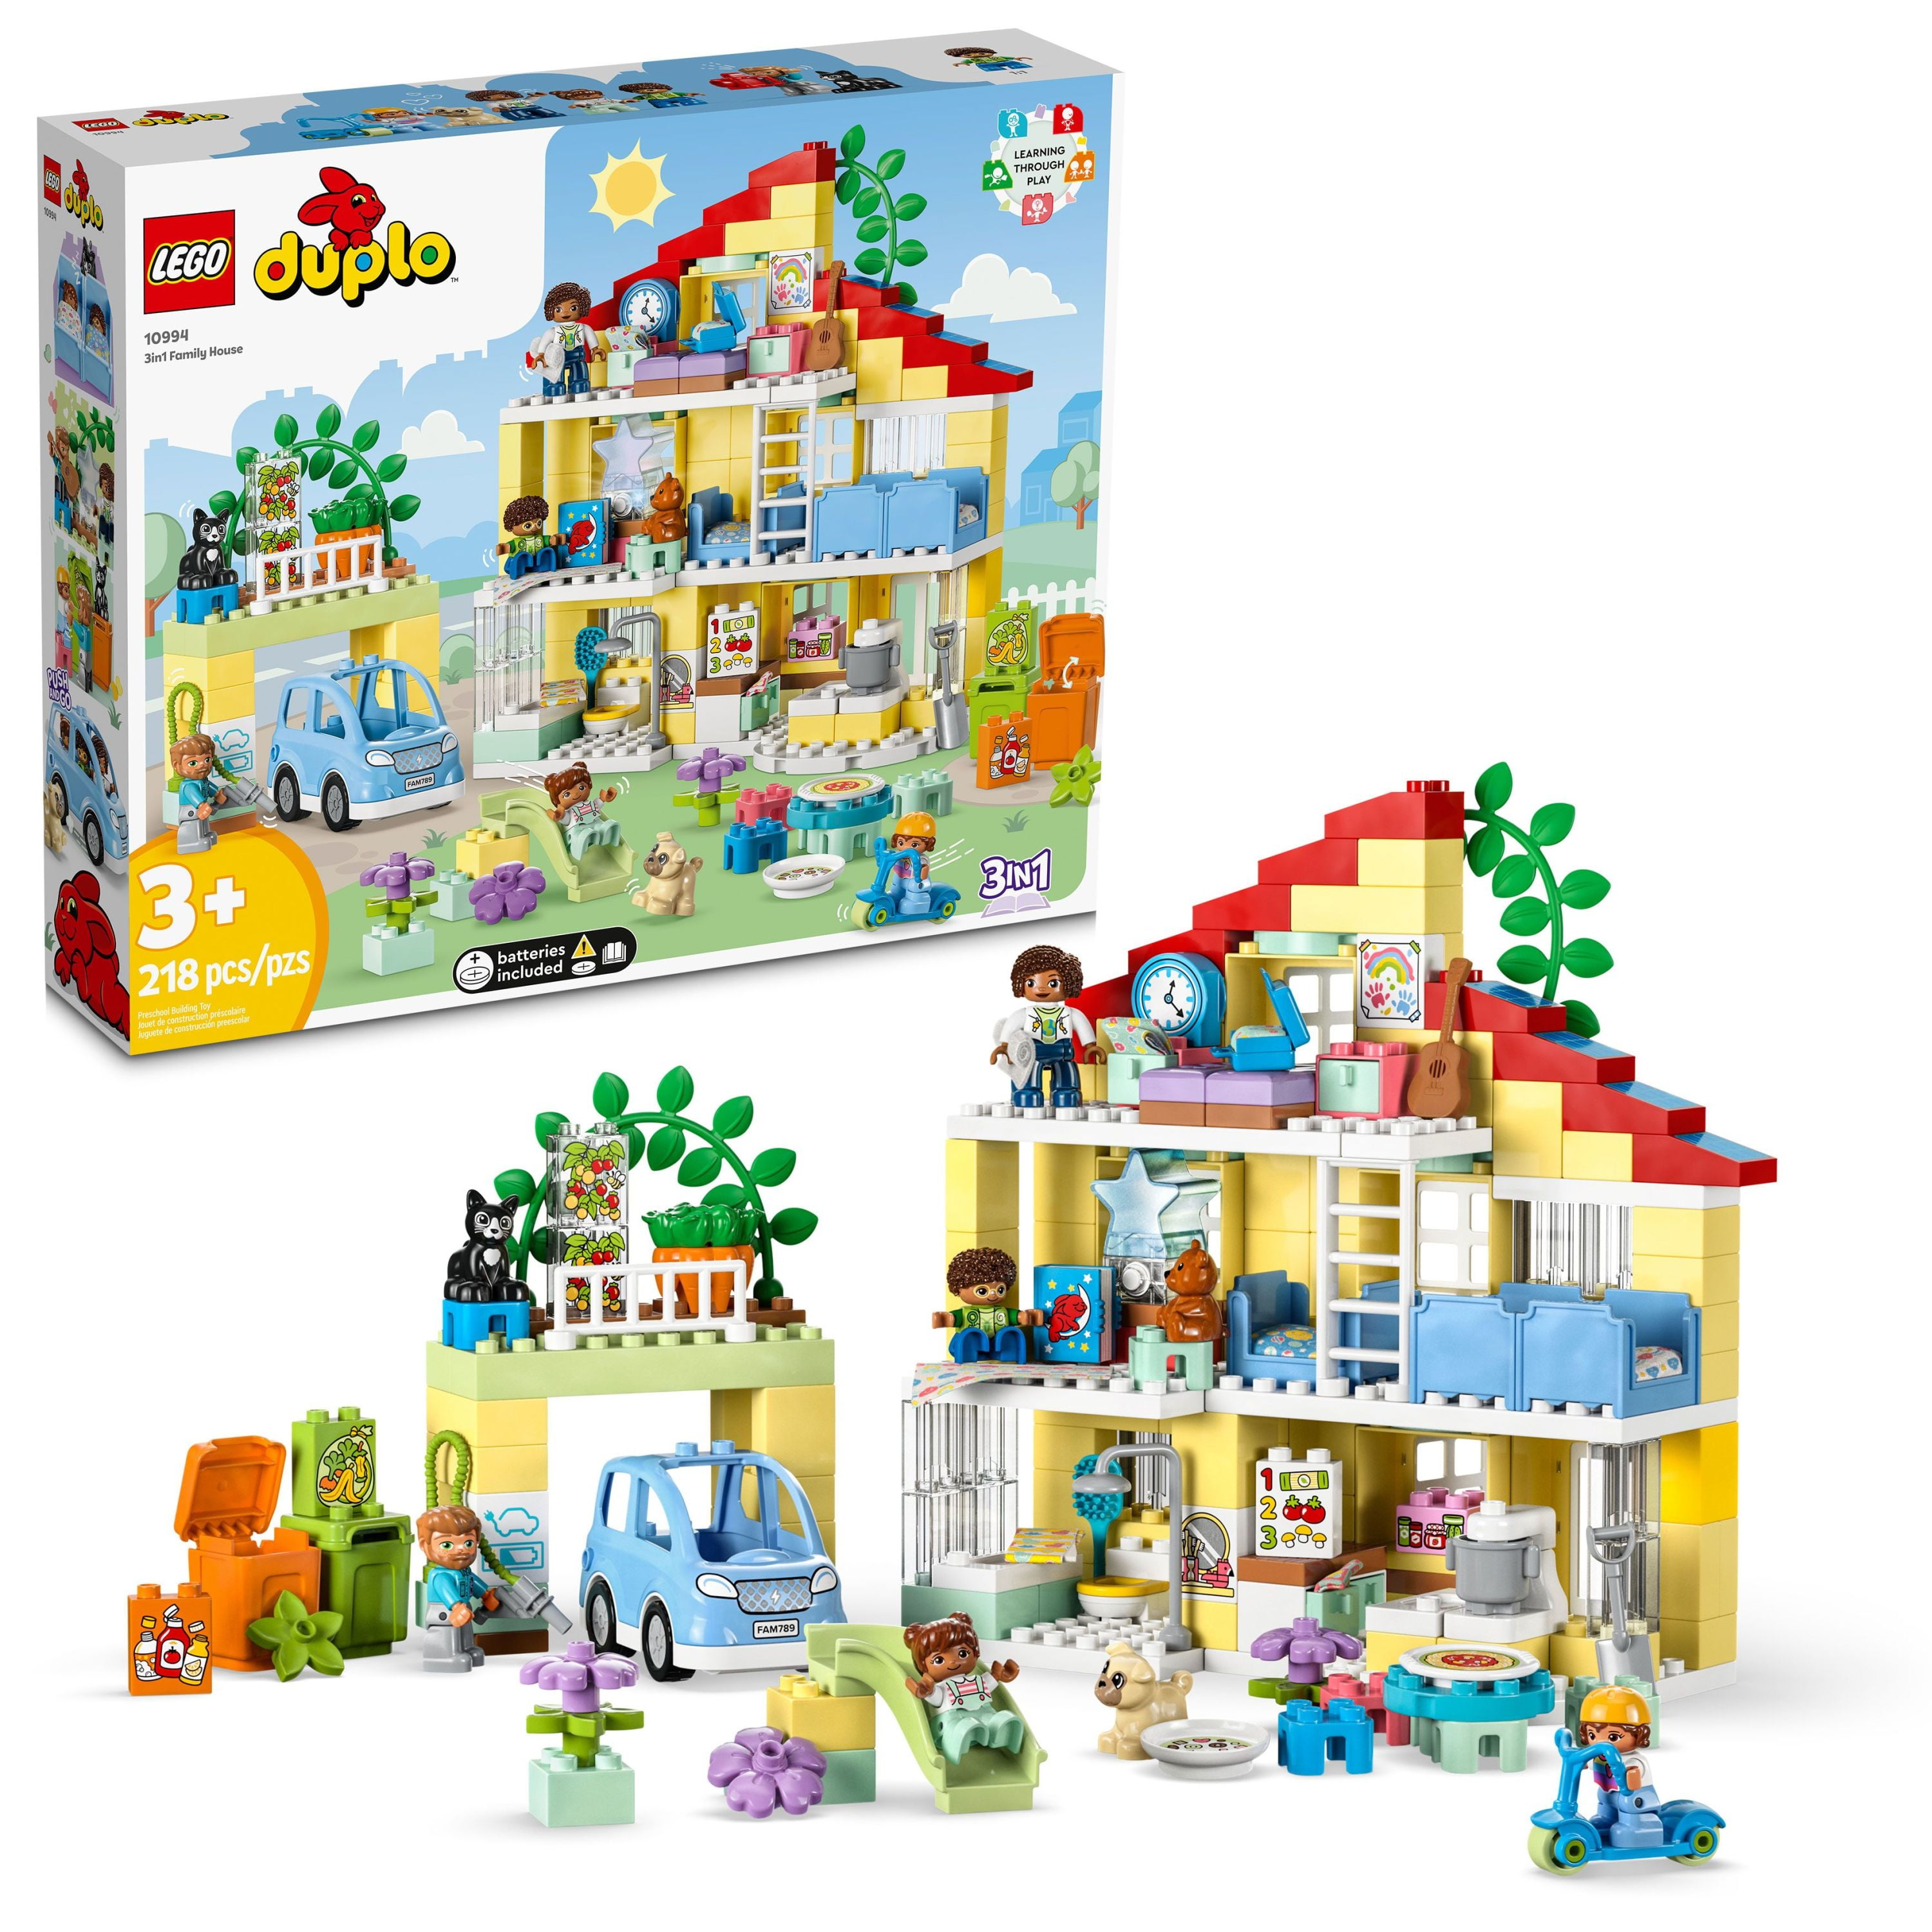 LEGO DUPLO Town 3in1 Family House 10994 Educational STEM Building Toy Set  for Toddlers Ages 3+, Car Toy and 3 Floor House Lets the Whole Family  Build